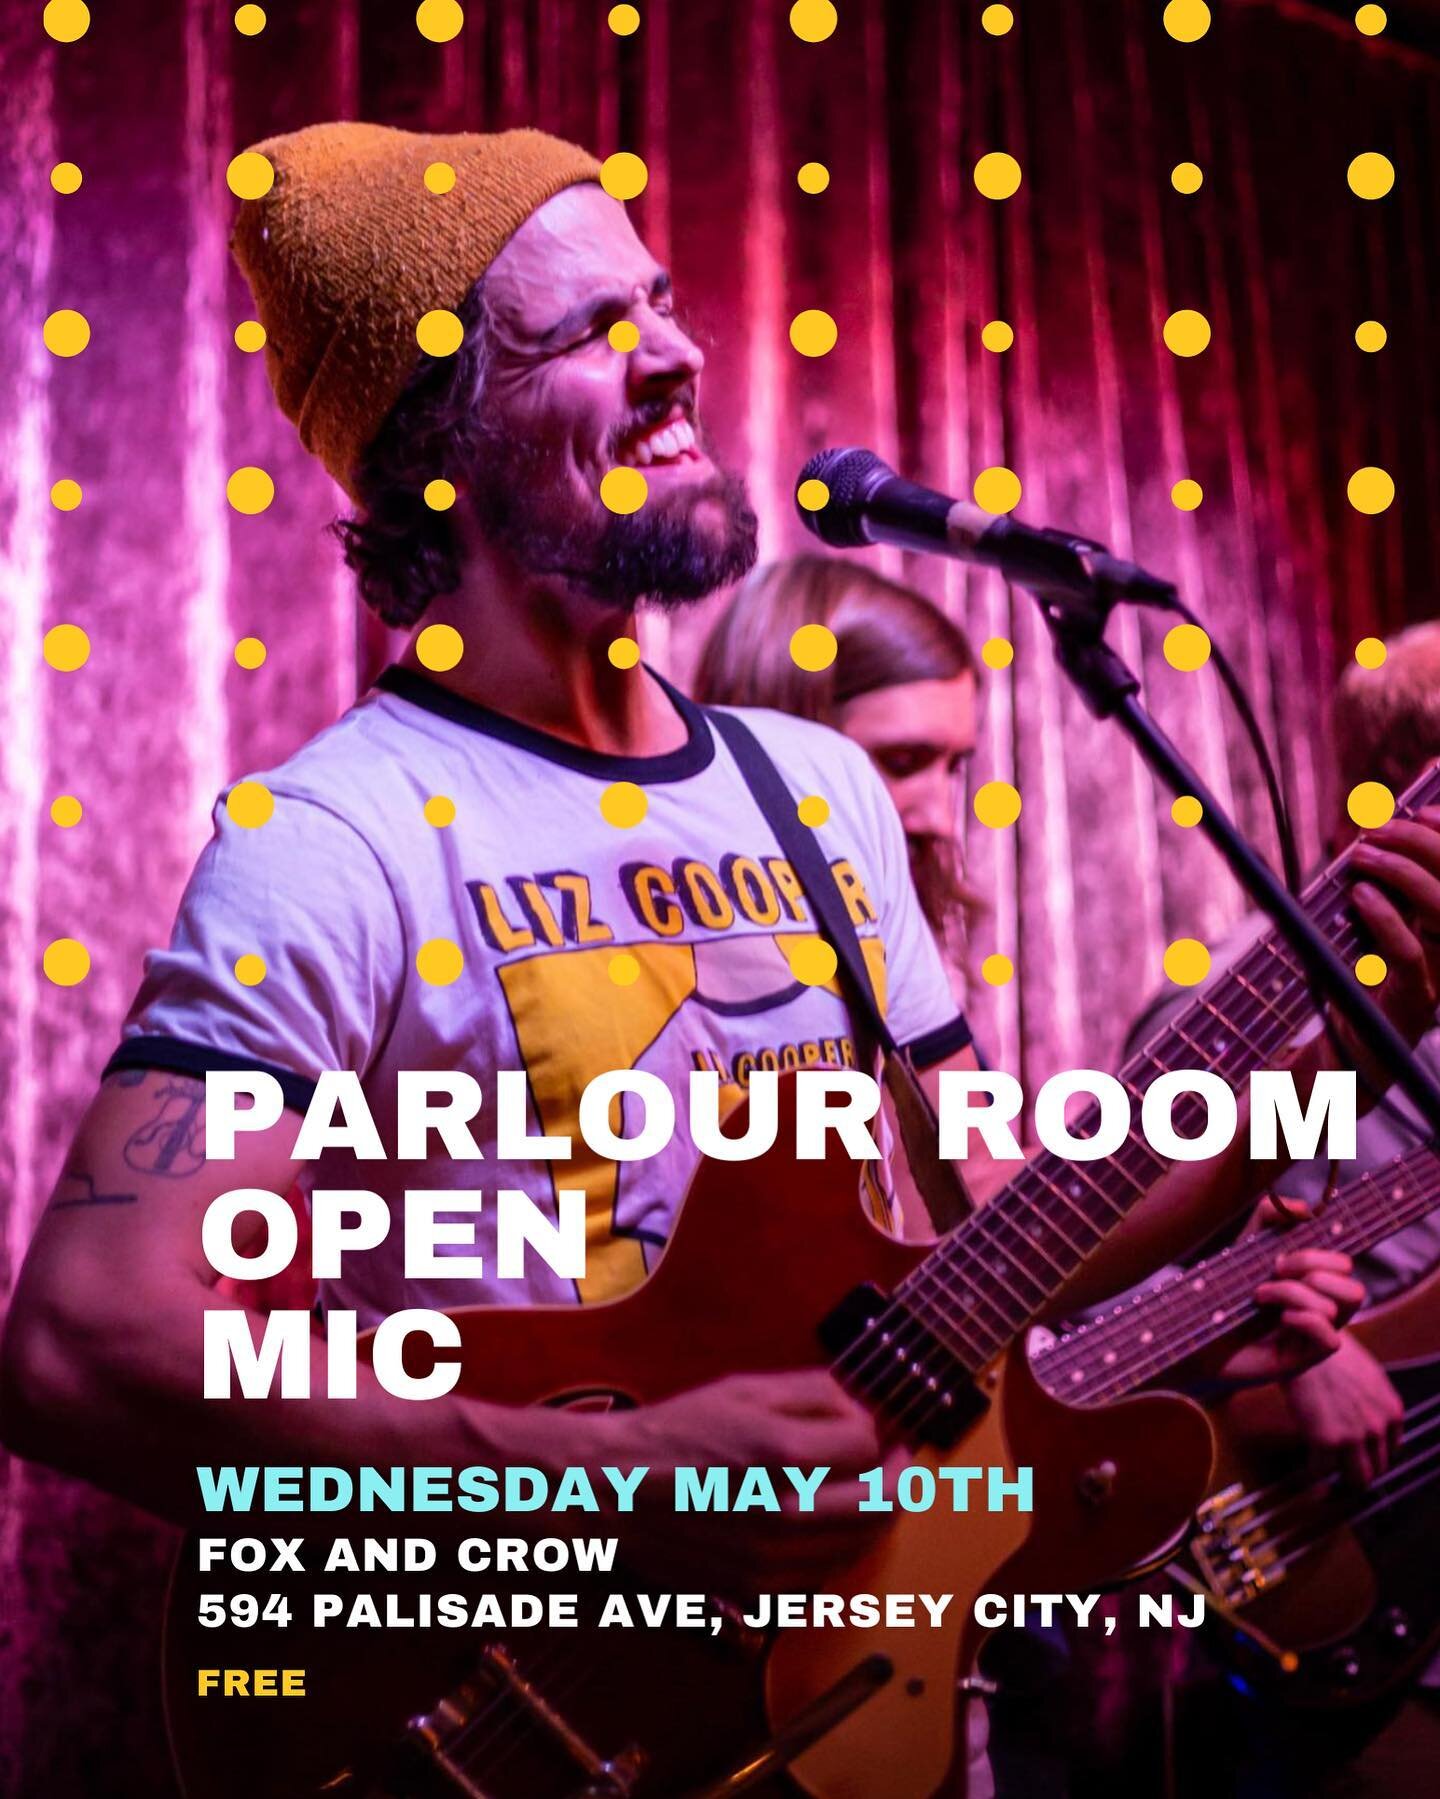 Tonight!
Hosting another Open Mic in the best singer/songwriter room around. Bring your axe! Or use mine. 7:30pm doors/sign up. 2 songs/10minutes.
#openmic #openmicnj #njopenmic #openmicnight #jerseycityopenmic #jcheights